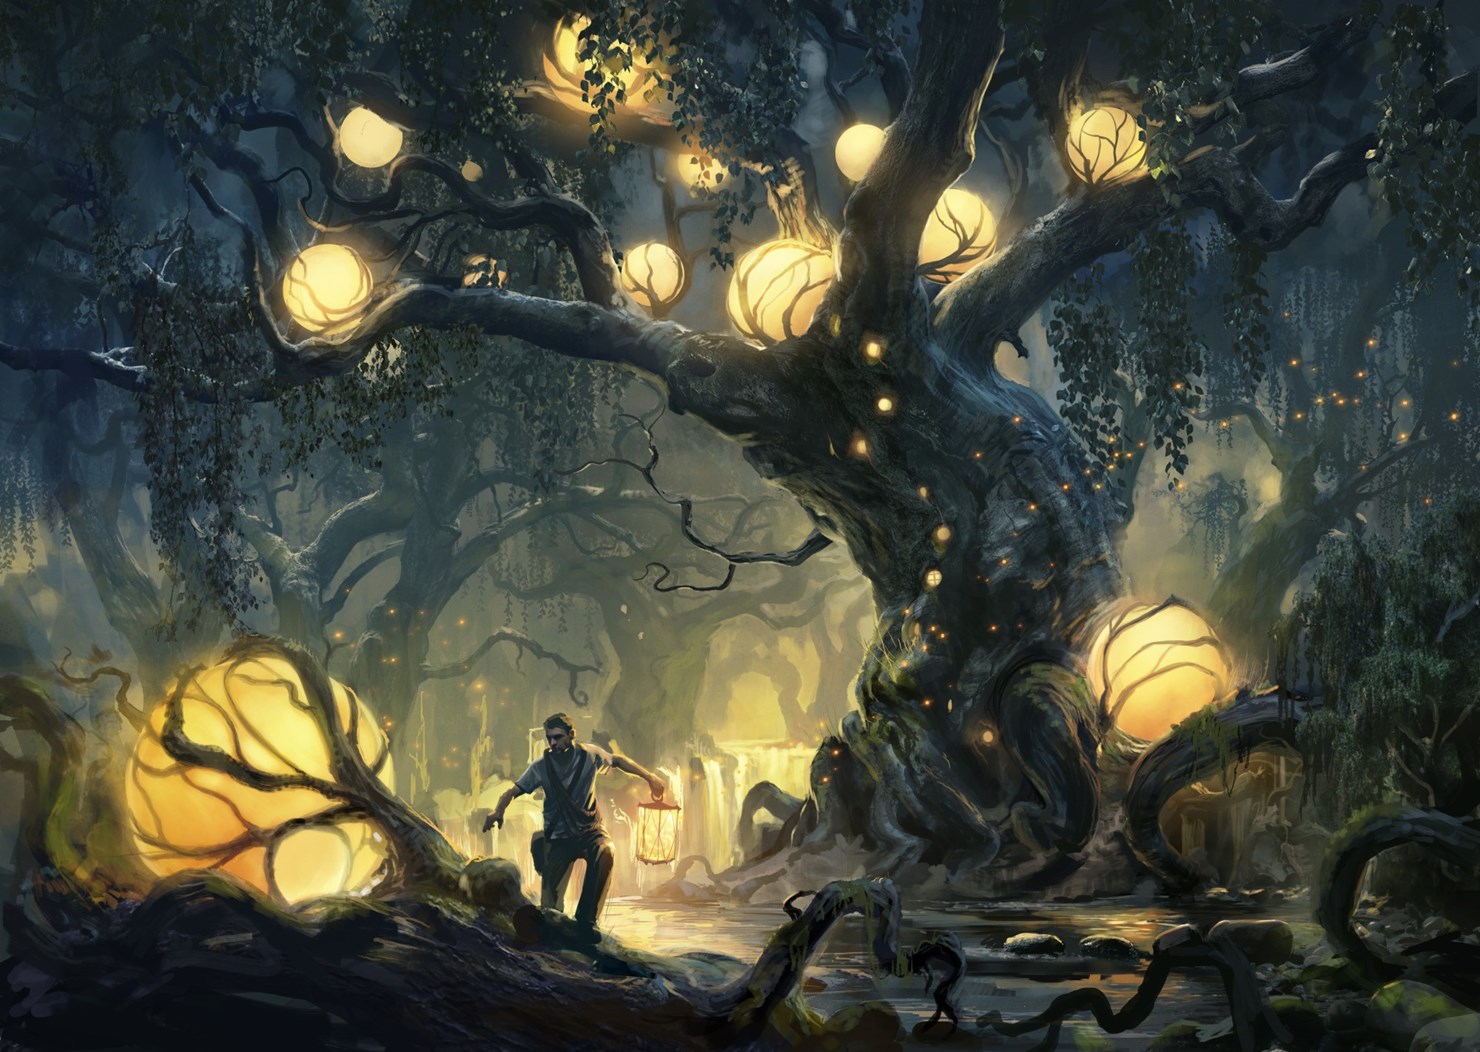 “Heart of the Forest” by Tuomas Korpi.